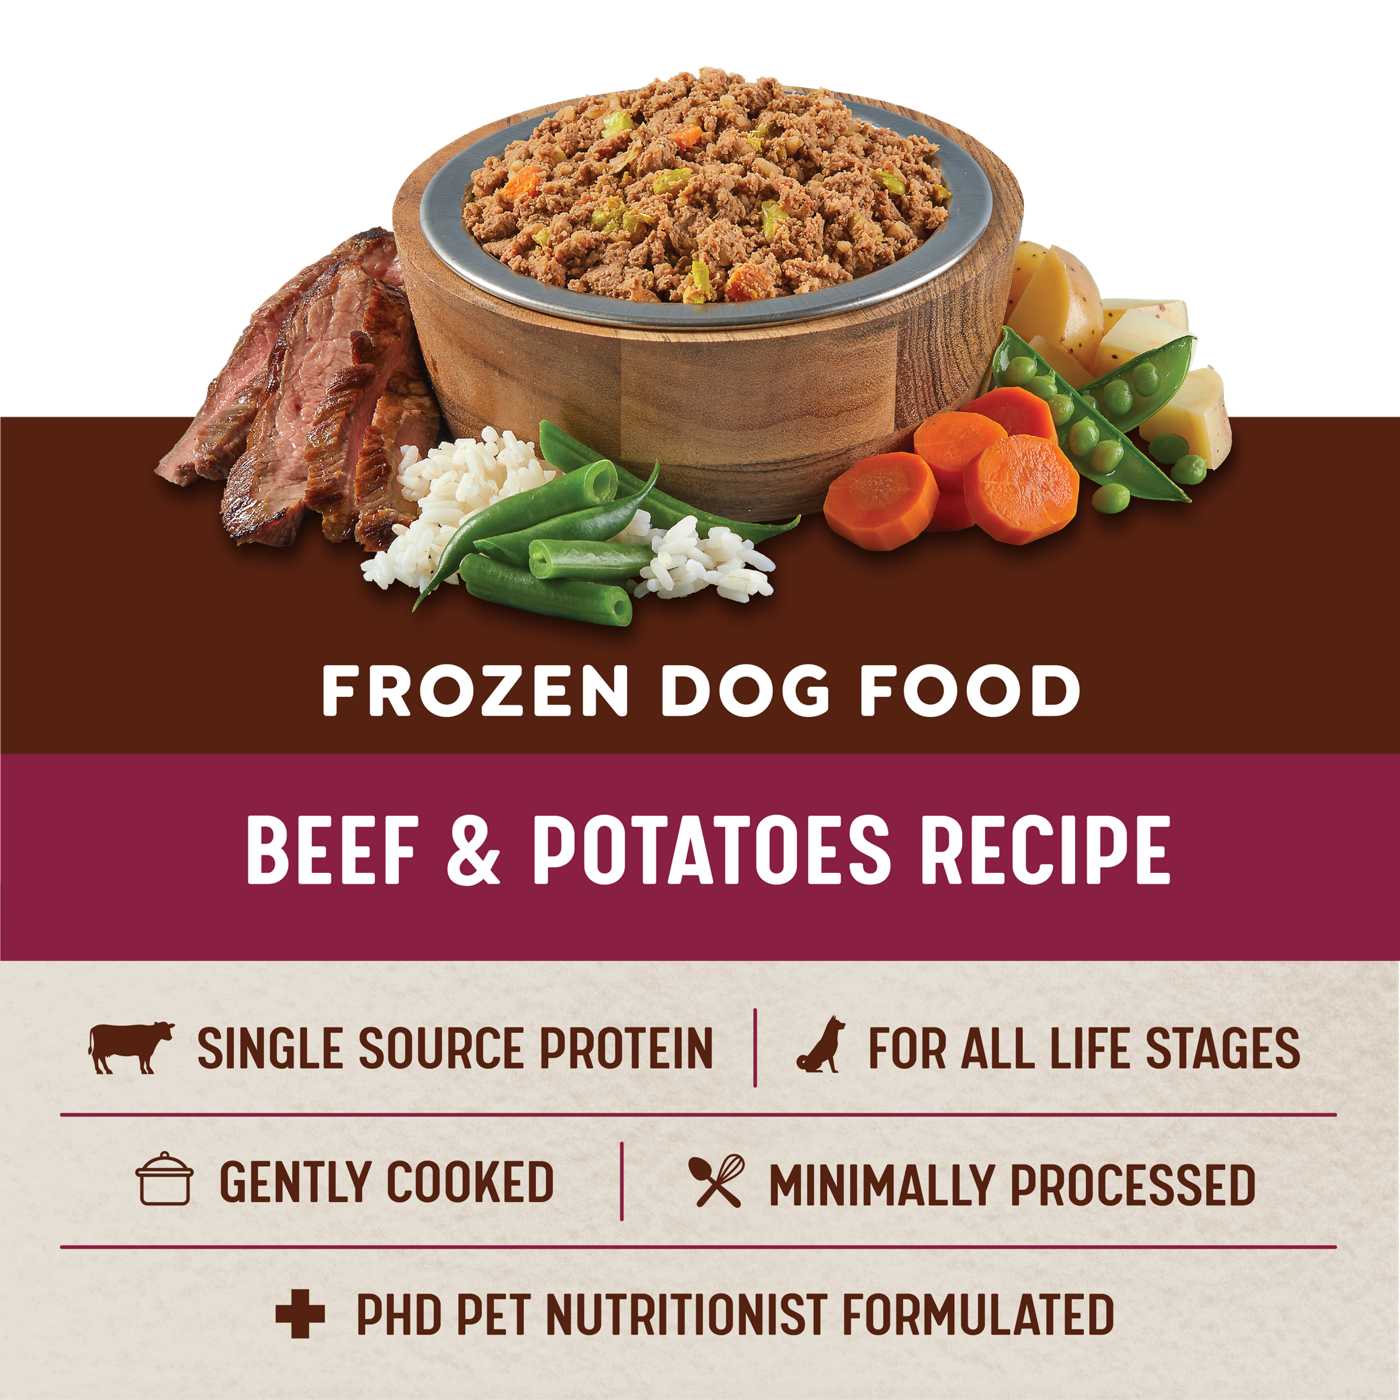 Heritage Ranch by H-E-B Frozen Dog Food – Beef & Potatoes; image 7 of 7